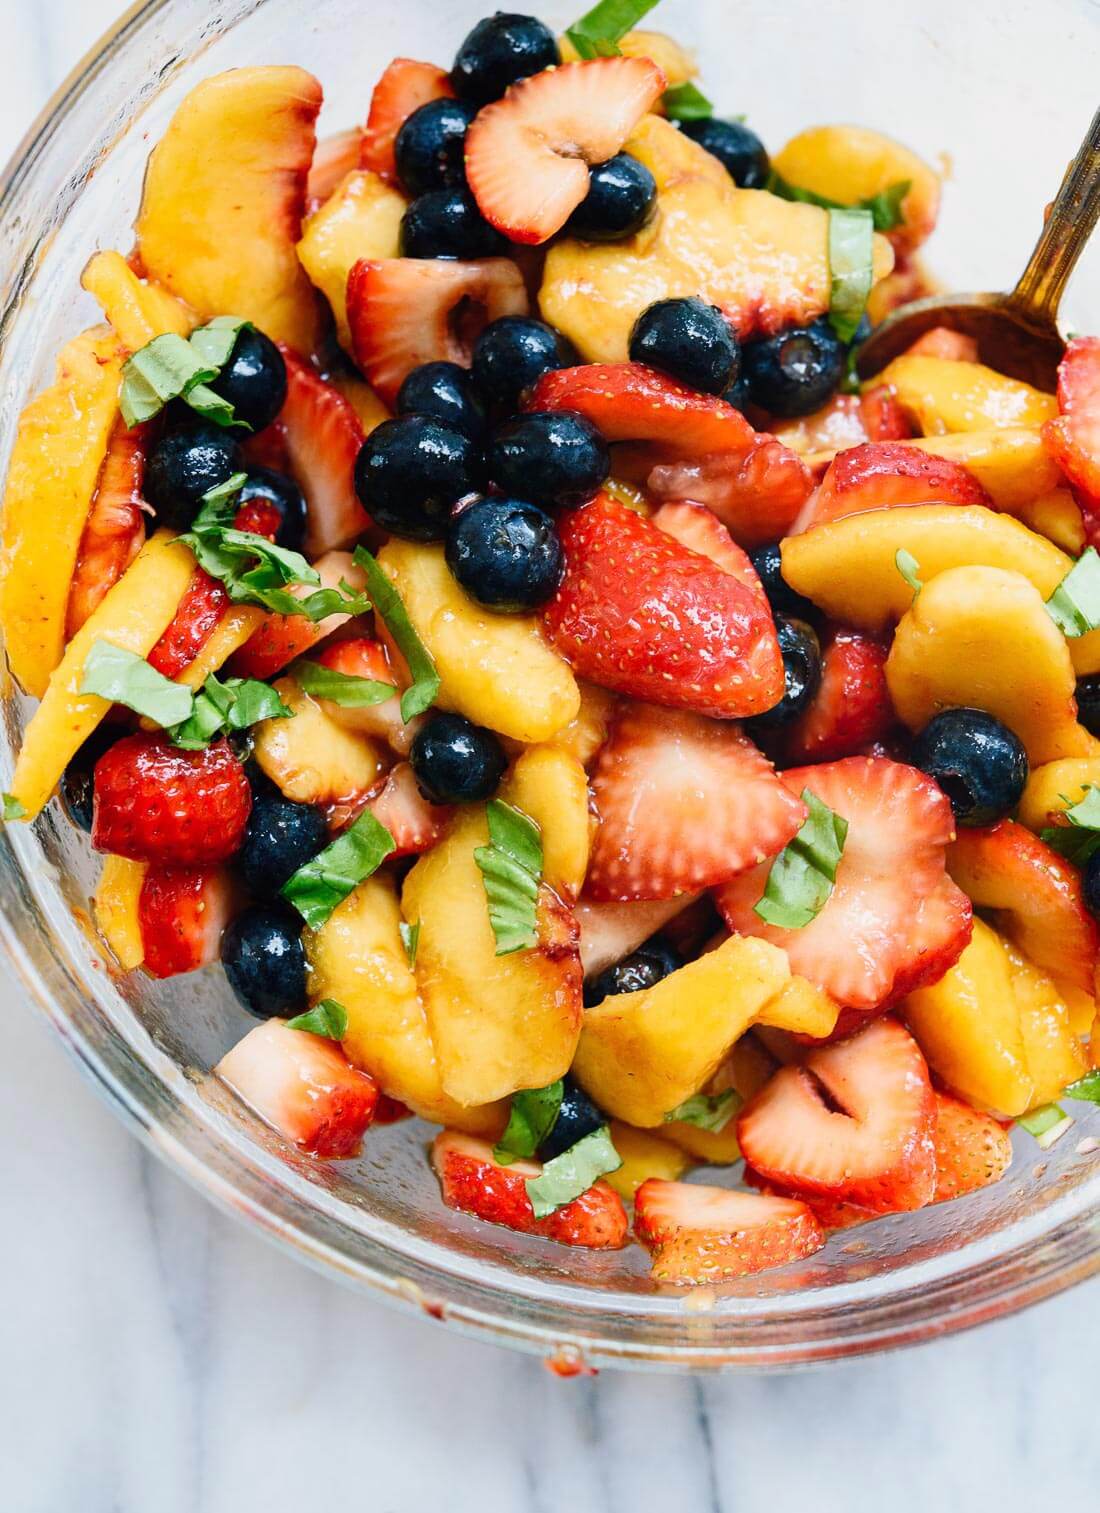 Take advantage of ripe summer fruit to make this simple summer fruit salad! Peaches, strawberries, blueberries, and balsamic vinegar make a great fruit salad. cookieandkate.com